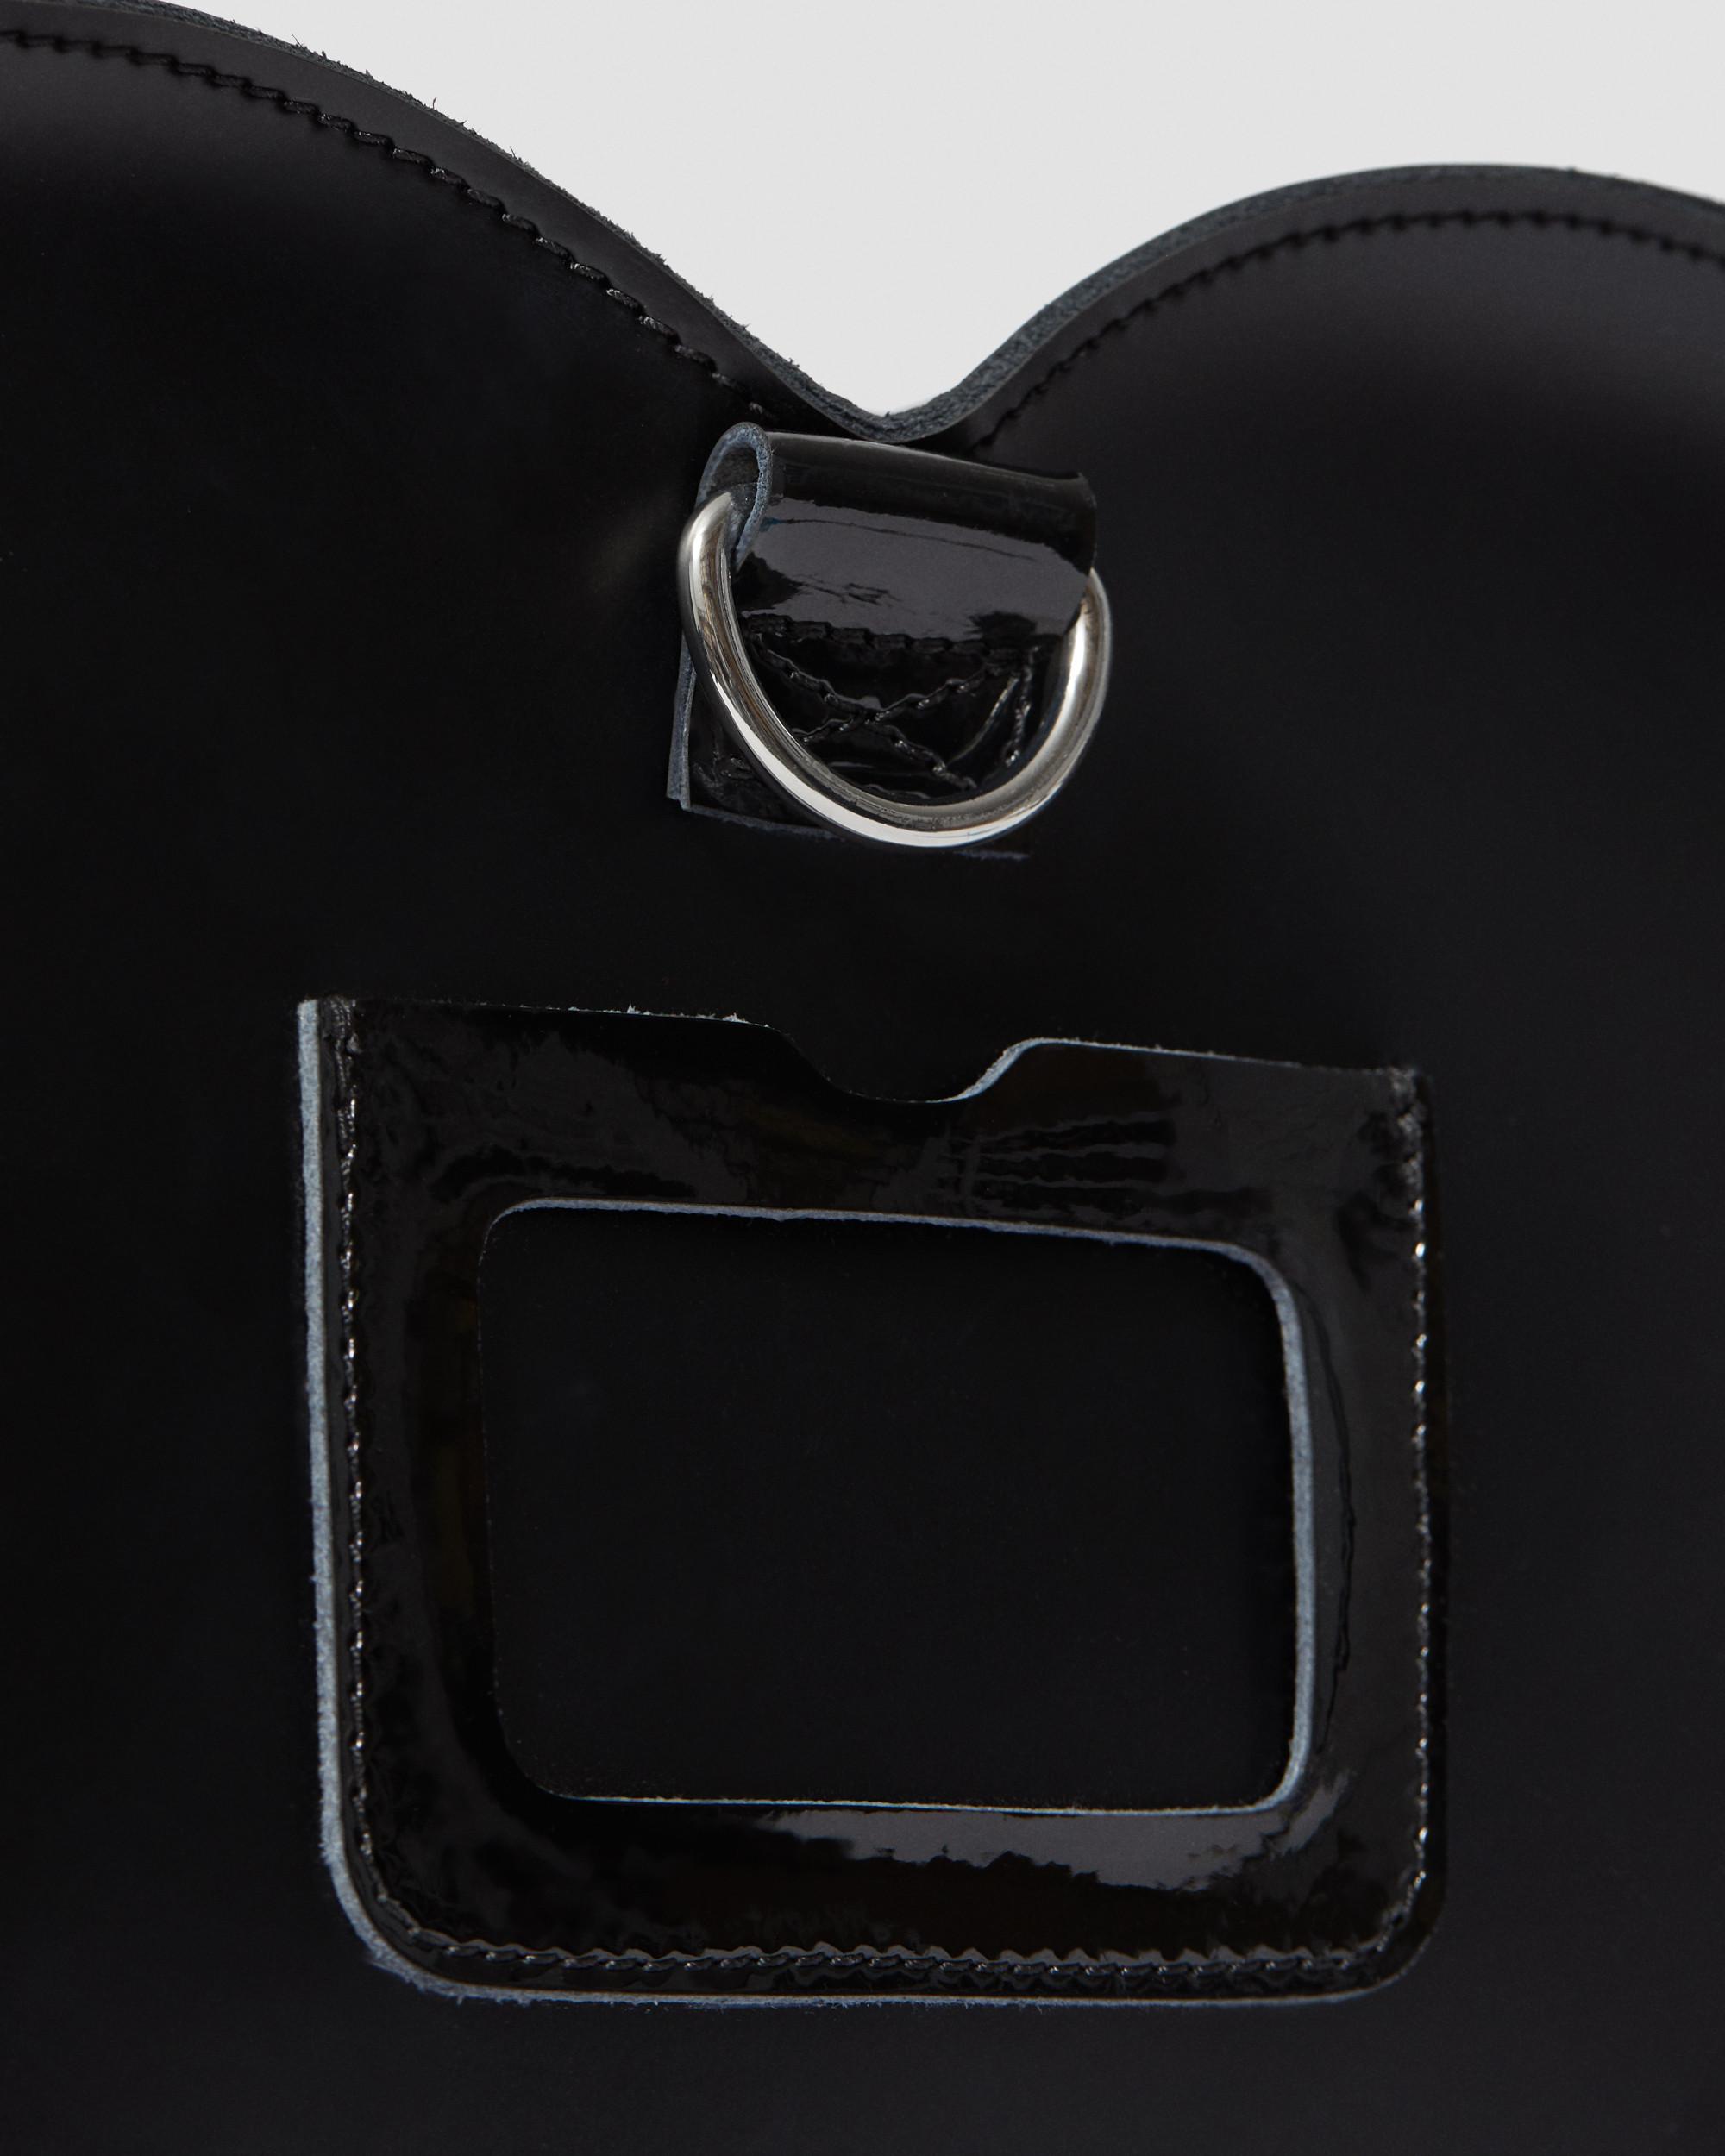 Leather Heart Shaped Bag in Black